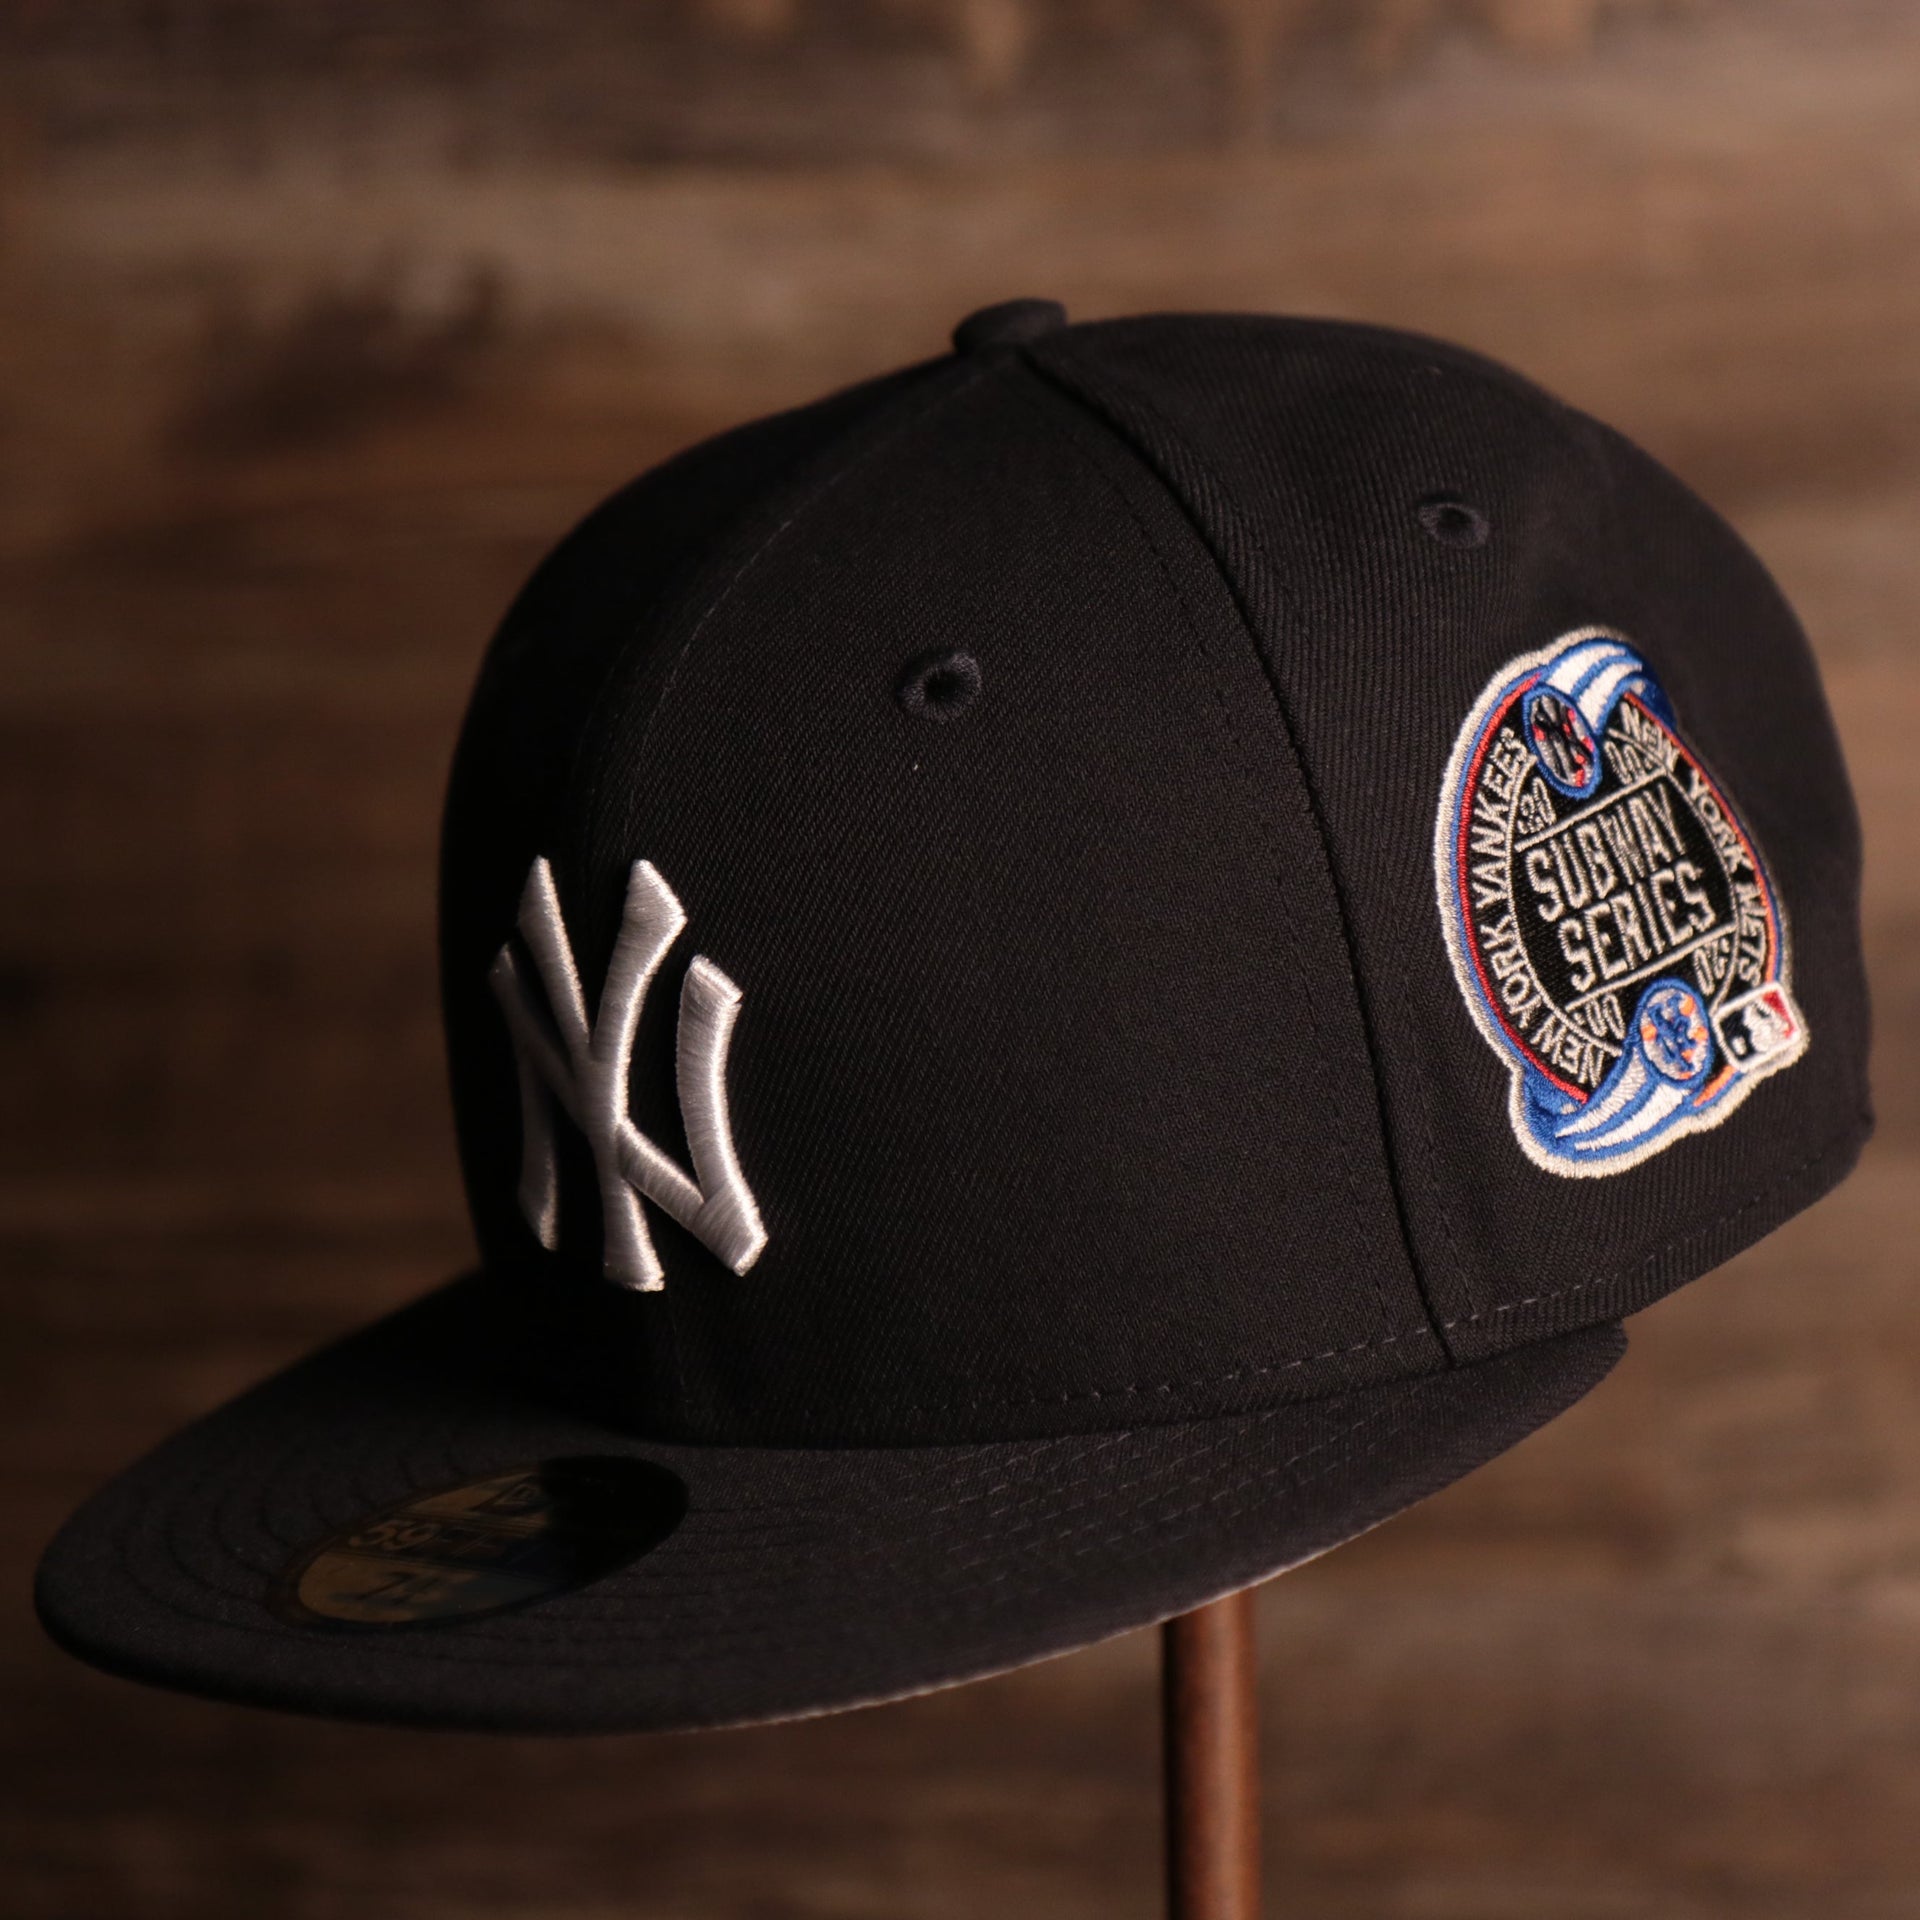 Yankees On-Field Grey Bottom Fitted Cap | New York Yankees 2000 Game Worn Subway Series Side Patch Gray Under Brim 59Fifty Fitted Hat the front of this fitted cap has the yankees logo with the subway series logo on the side